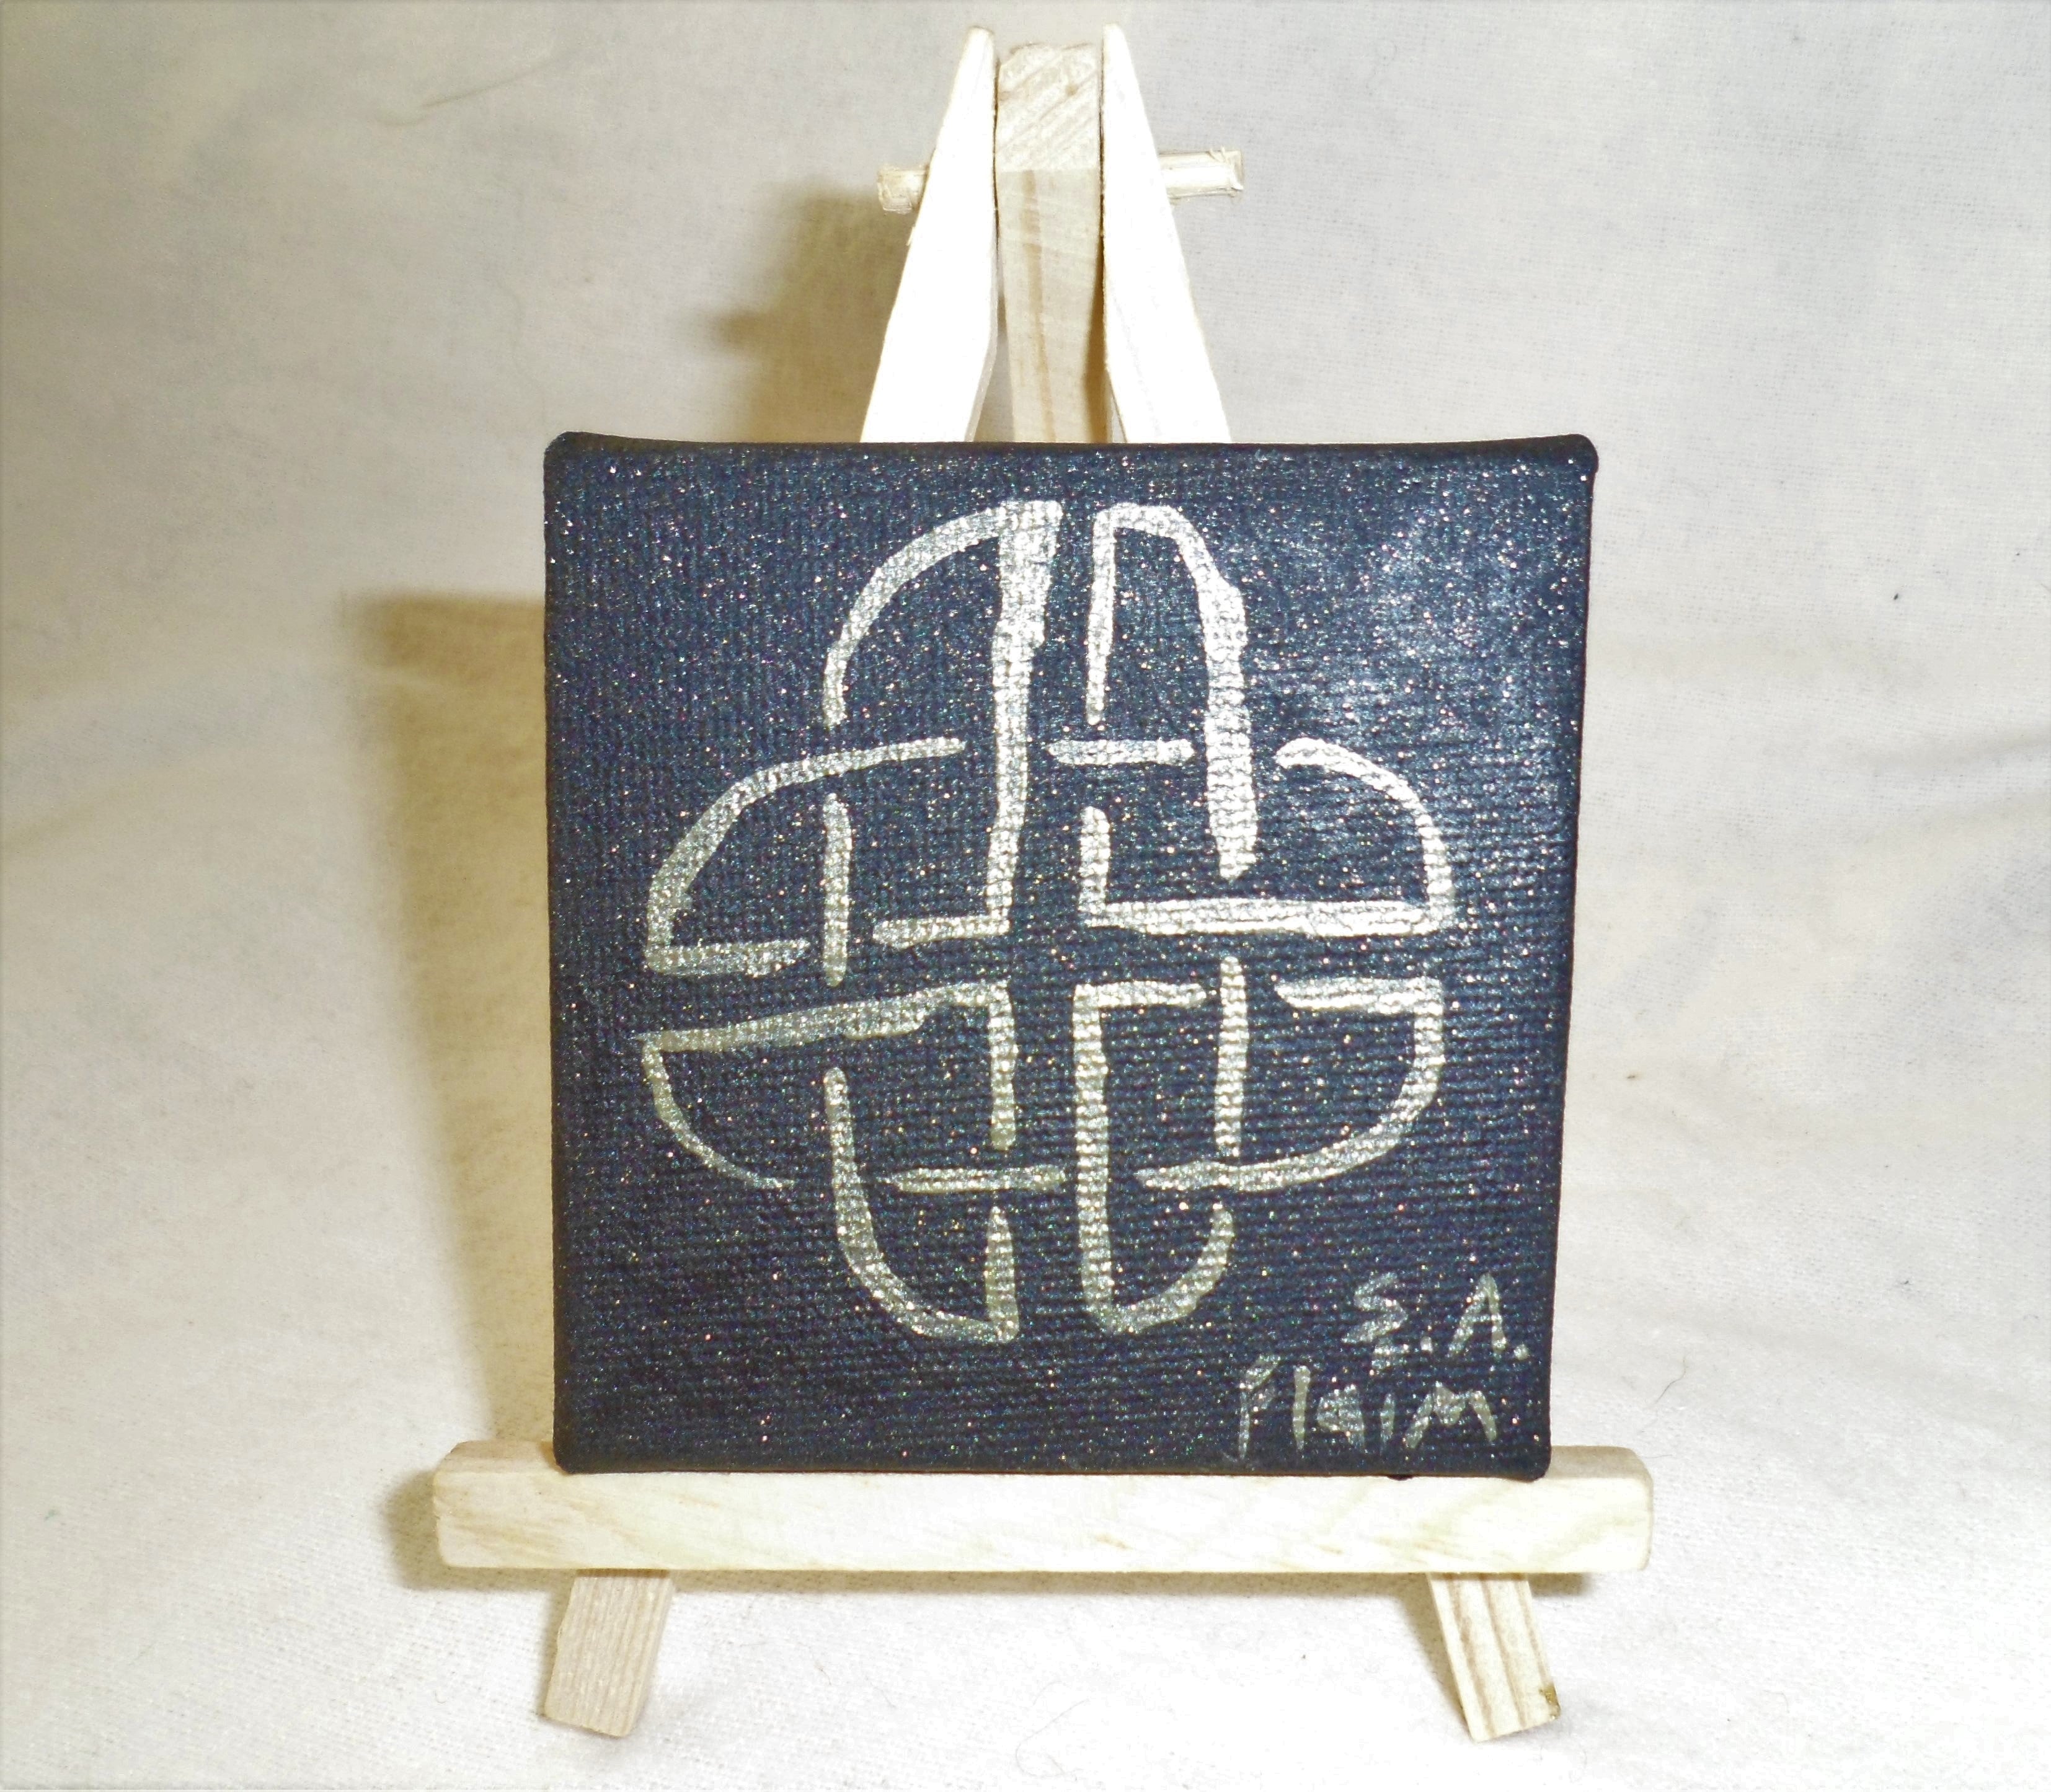 Celtic Knot Mini Easel Art by S.A.Flaim - Tully Crafts